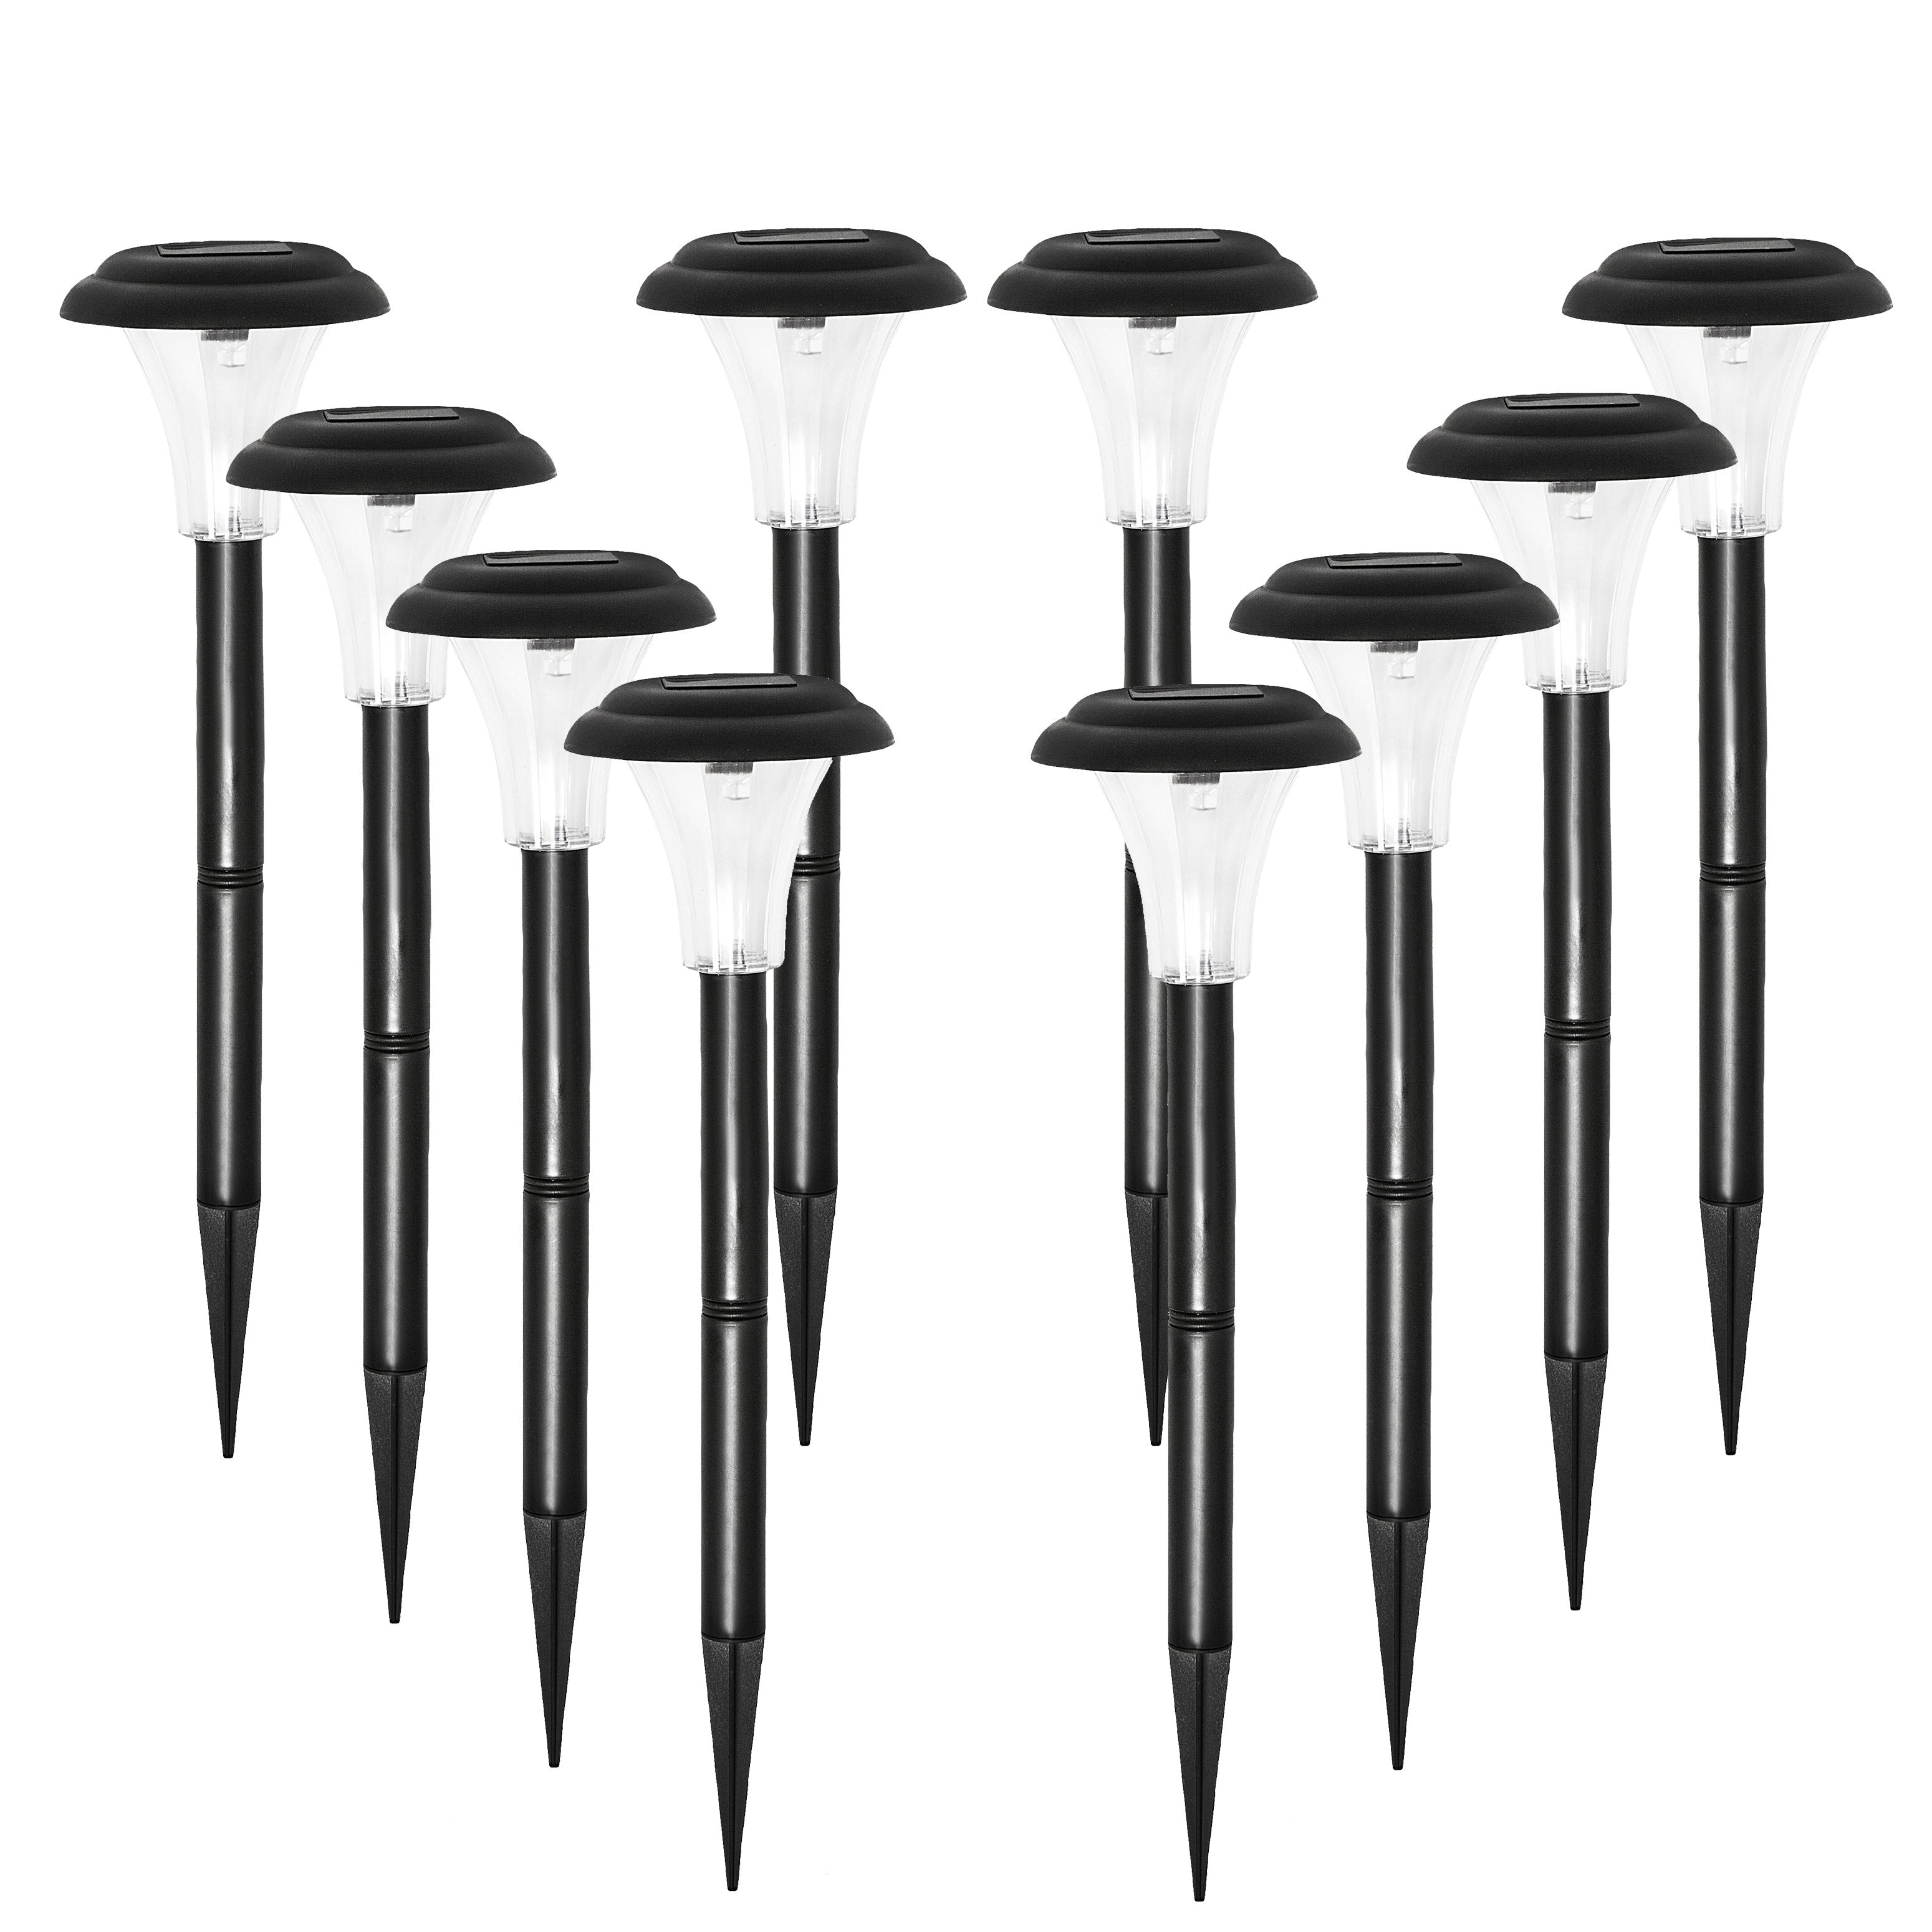 Halo XL Plastic Solar Garden Stake Lights with Bright White LED